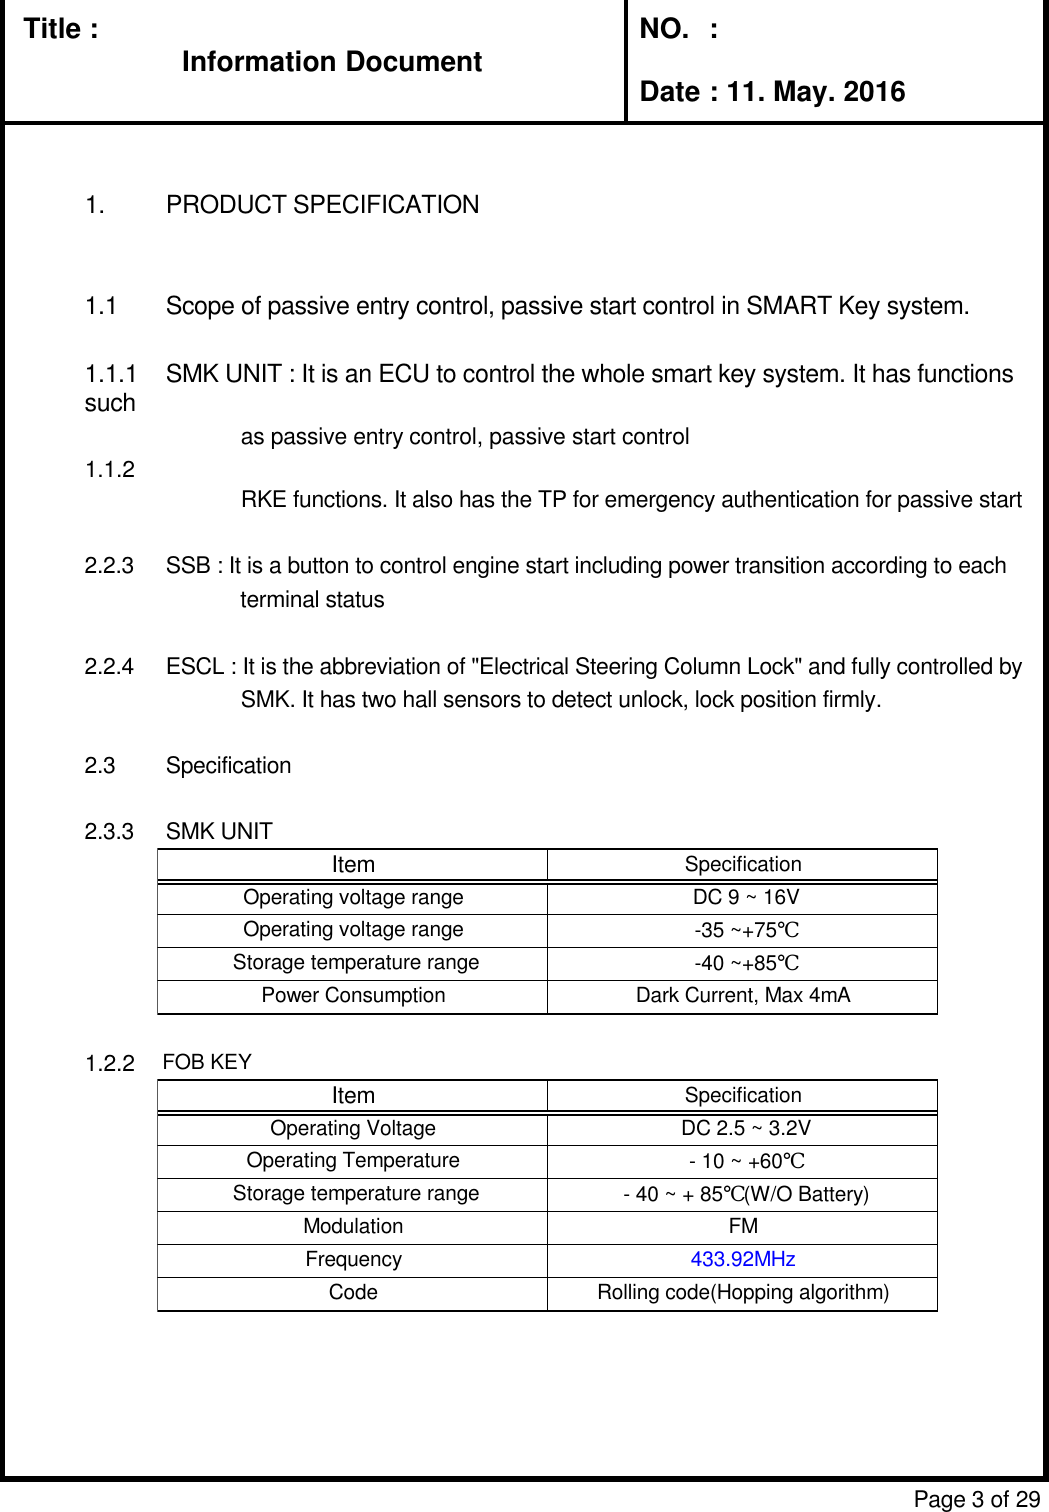 Information DocumentTitle : Information DocumentNO.  :Date : 11. May. 20161. PRODUCT SPECIFICATION1.1 Scope of passive entry control, passive start control in SMART Key system.1.1.1 SMK UNIT : It is an ECU to control the whole smart key system. It has functions suchas passive entry control, passive start controlFOB KEY : It has the functions for passive entry and passive start including  the previousRKE functions. It also has the TP for emergency authentication for passive start2.2.3 SSB : It is a button to control engine start including power transition according to eachterminal status2.2.4 ESCL : It is the abbreviation of &quot;Electrical Steering Column Lock&quot; and fully controlled bySMK. It has two hall sensors to detect unlock, lock position firmly.2.3 Specification2.3.3 SMK UNITFOB KEYPage 3 of 291.1.21.2.2ItemSpecificationOperating voltage rangeDC 9 ~ 16VOperating voltage range-35 ~+75℃Storage temperature range-40 ~+85℃Power ConsumptionDark Current, Max 4mAItemSpecificationOperating VoltageDC 2.5 ~ 3.2VOperating Temperature- 10 ~ +60℃Storage temperature range- 40 ~ + 85℃(W/O Battery)ModulationFMFrequency433.92MHzCodeRolling code(Hopping algorithm)